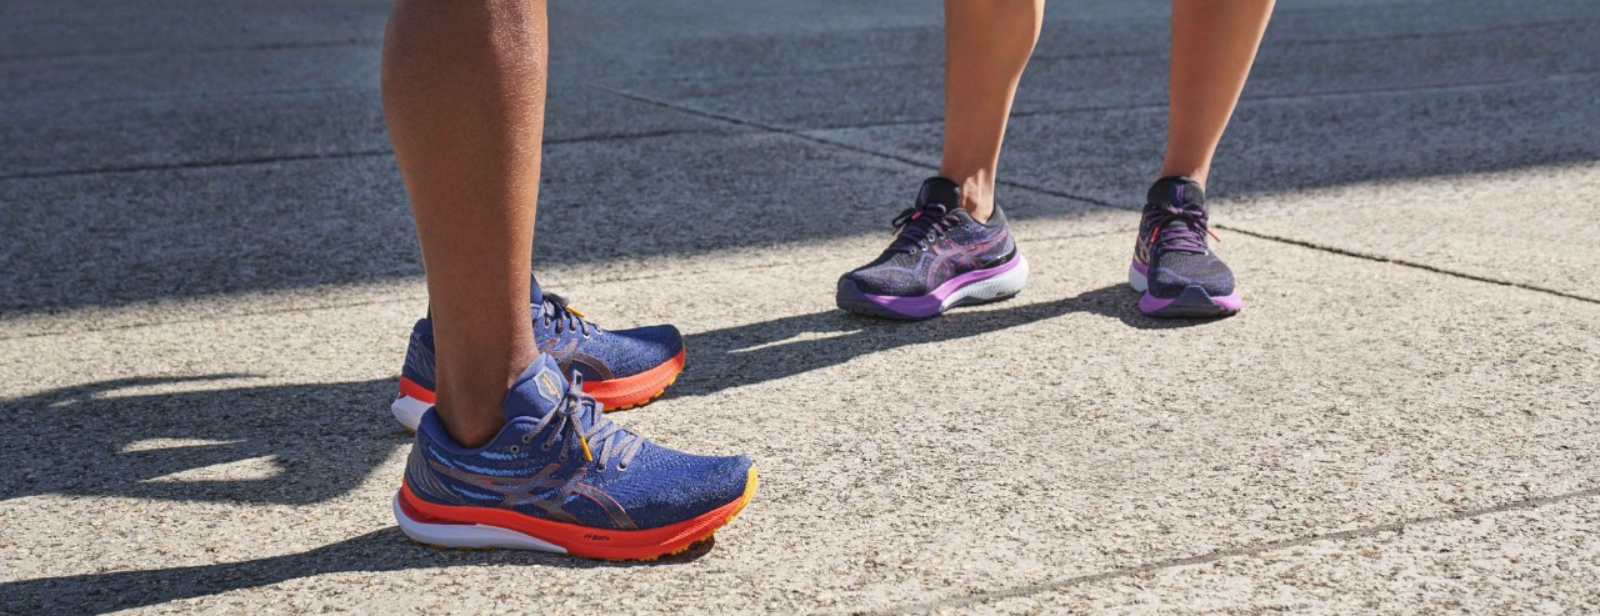 What is the difference between GEL-KAYANO™ 29 and GEL KAYANO™ 28? | ASICS